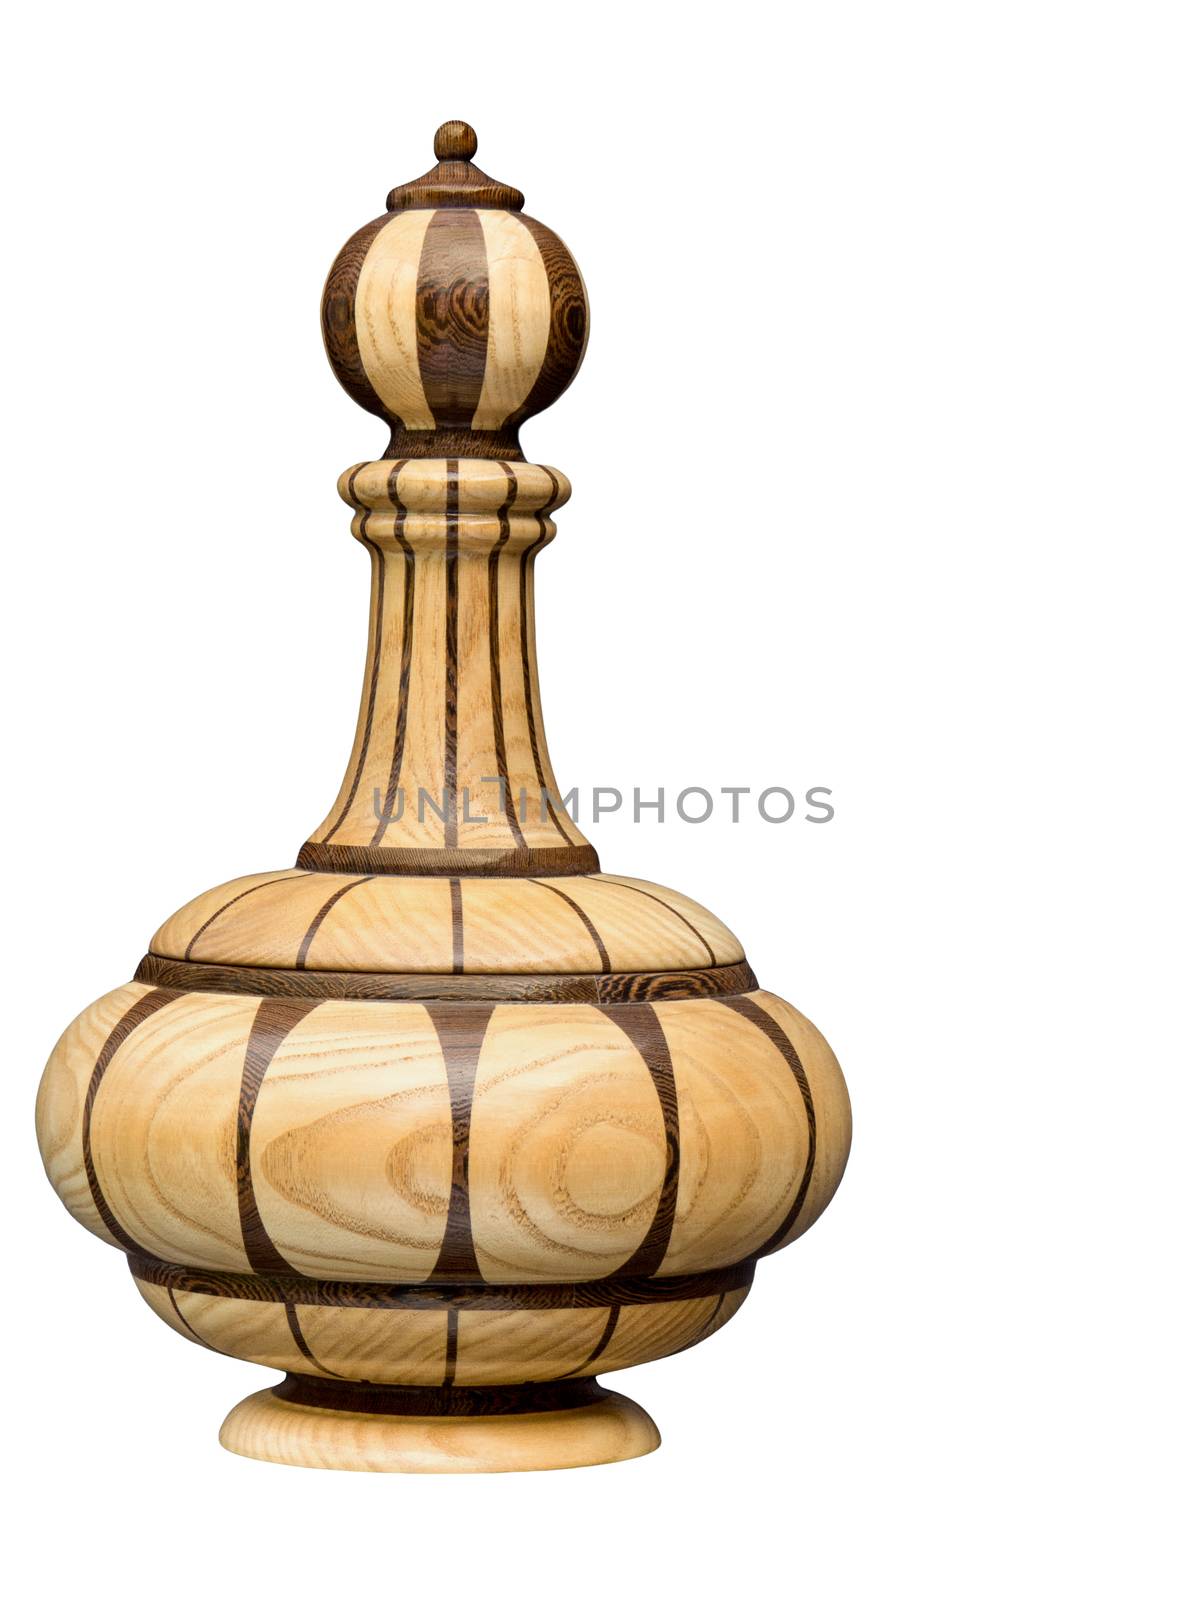 Wooden oriental pot isolated on white background